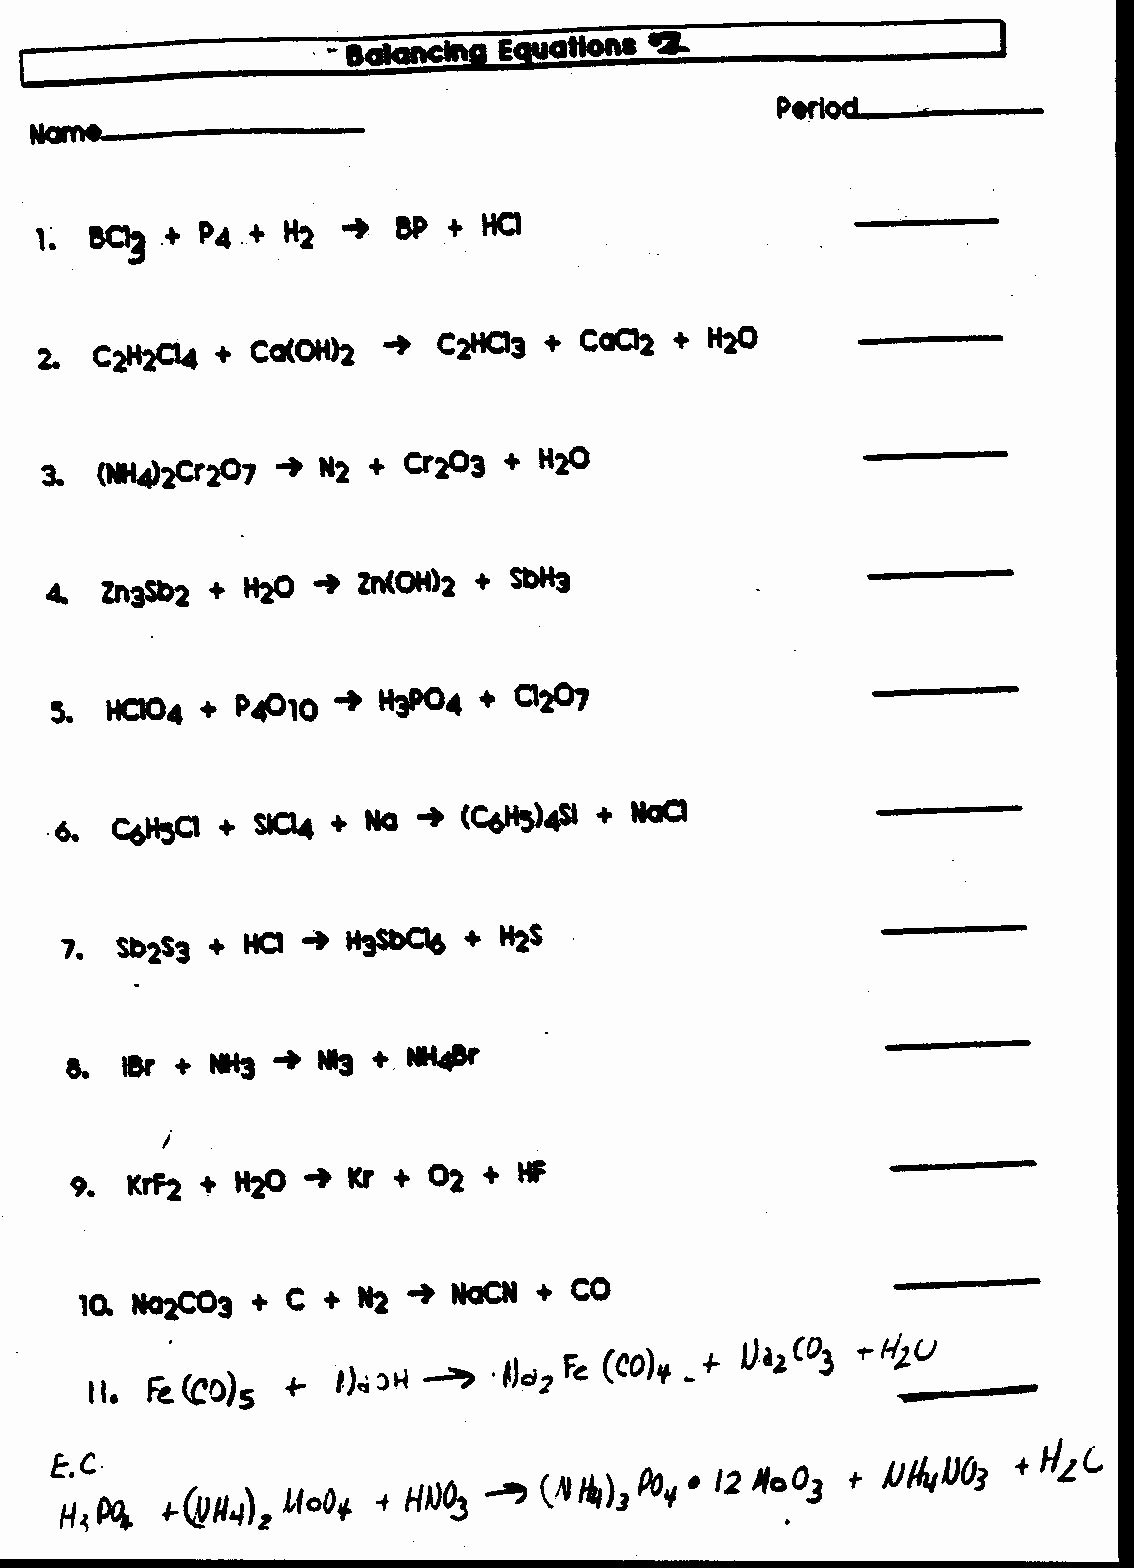 Balancing Chemical Equations Worksheet Answers Inspirational Balancing Equations Worksheet Health and Fitness Training